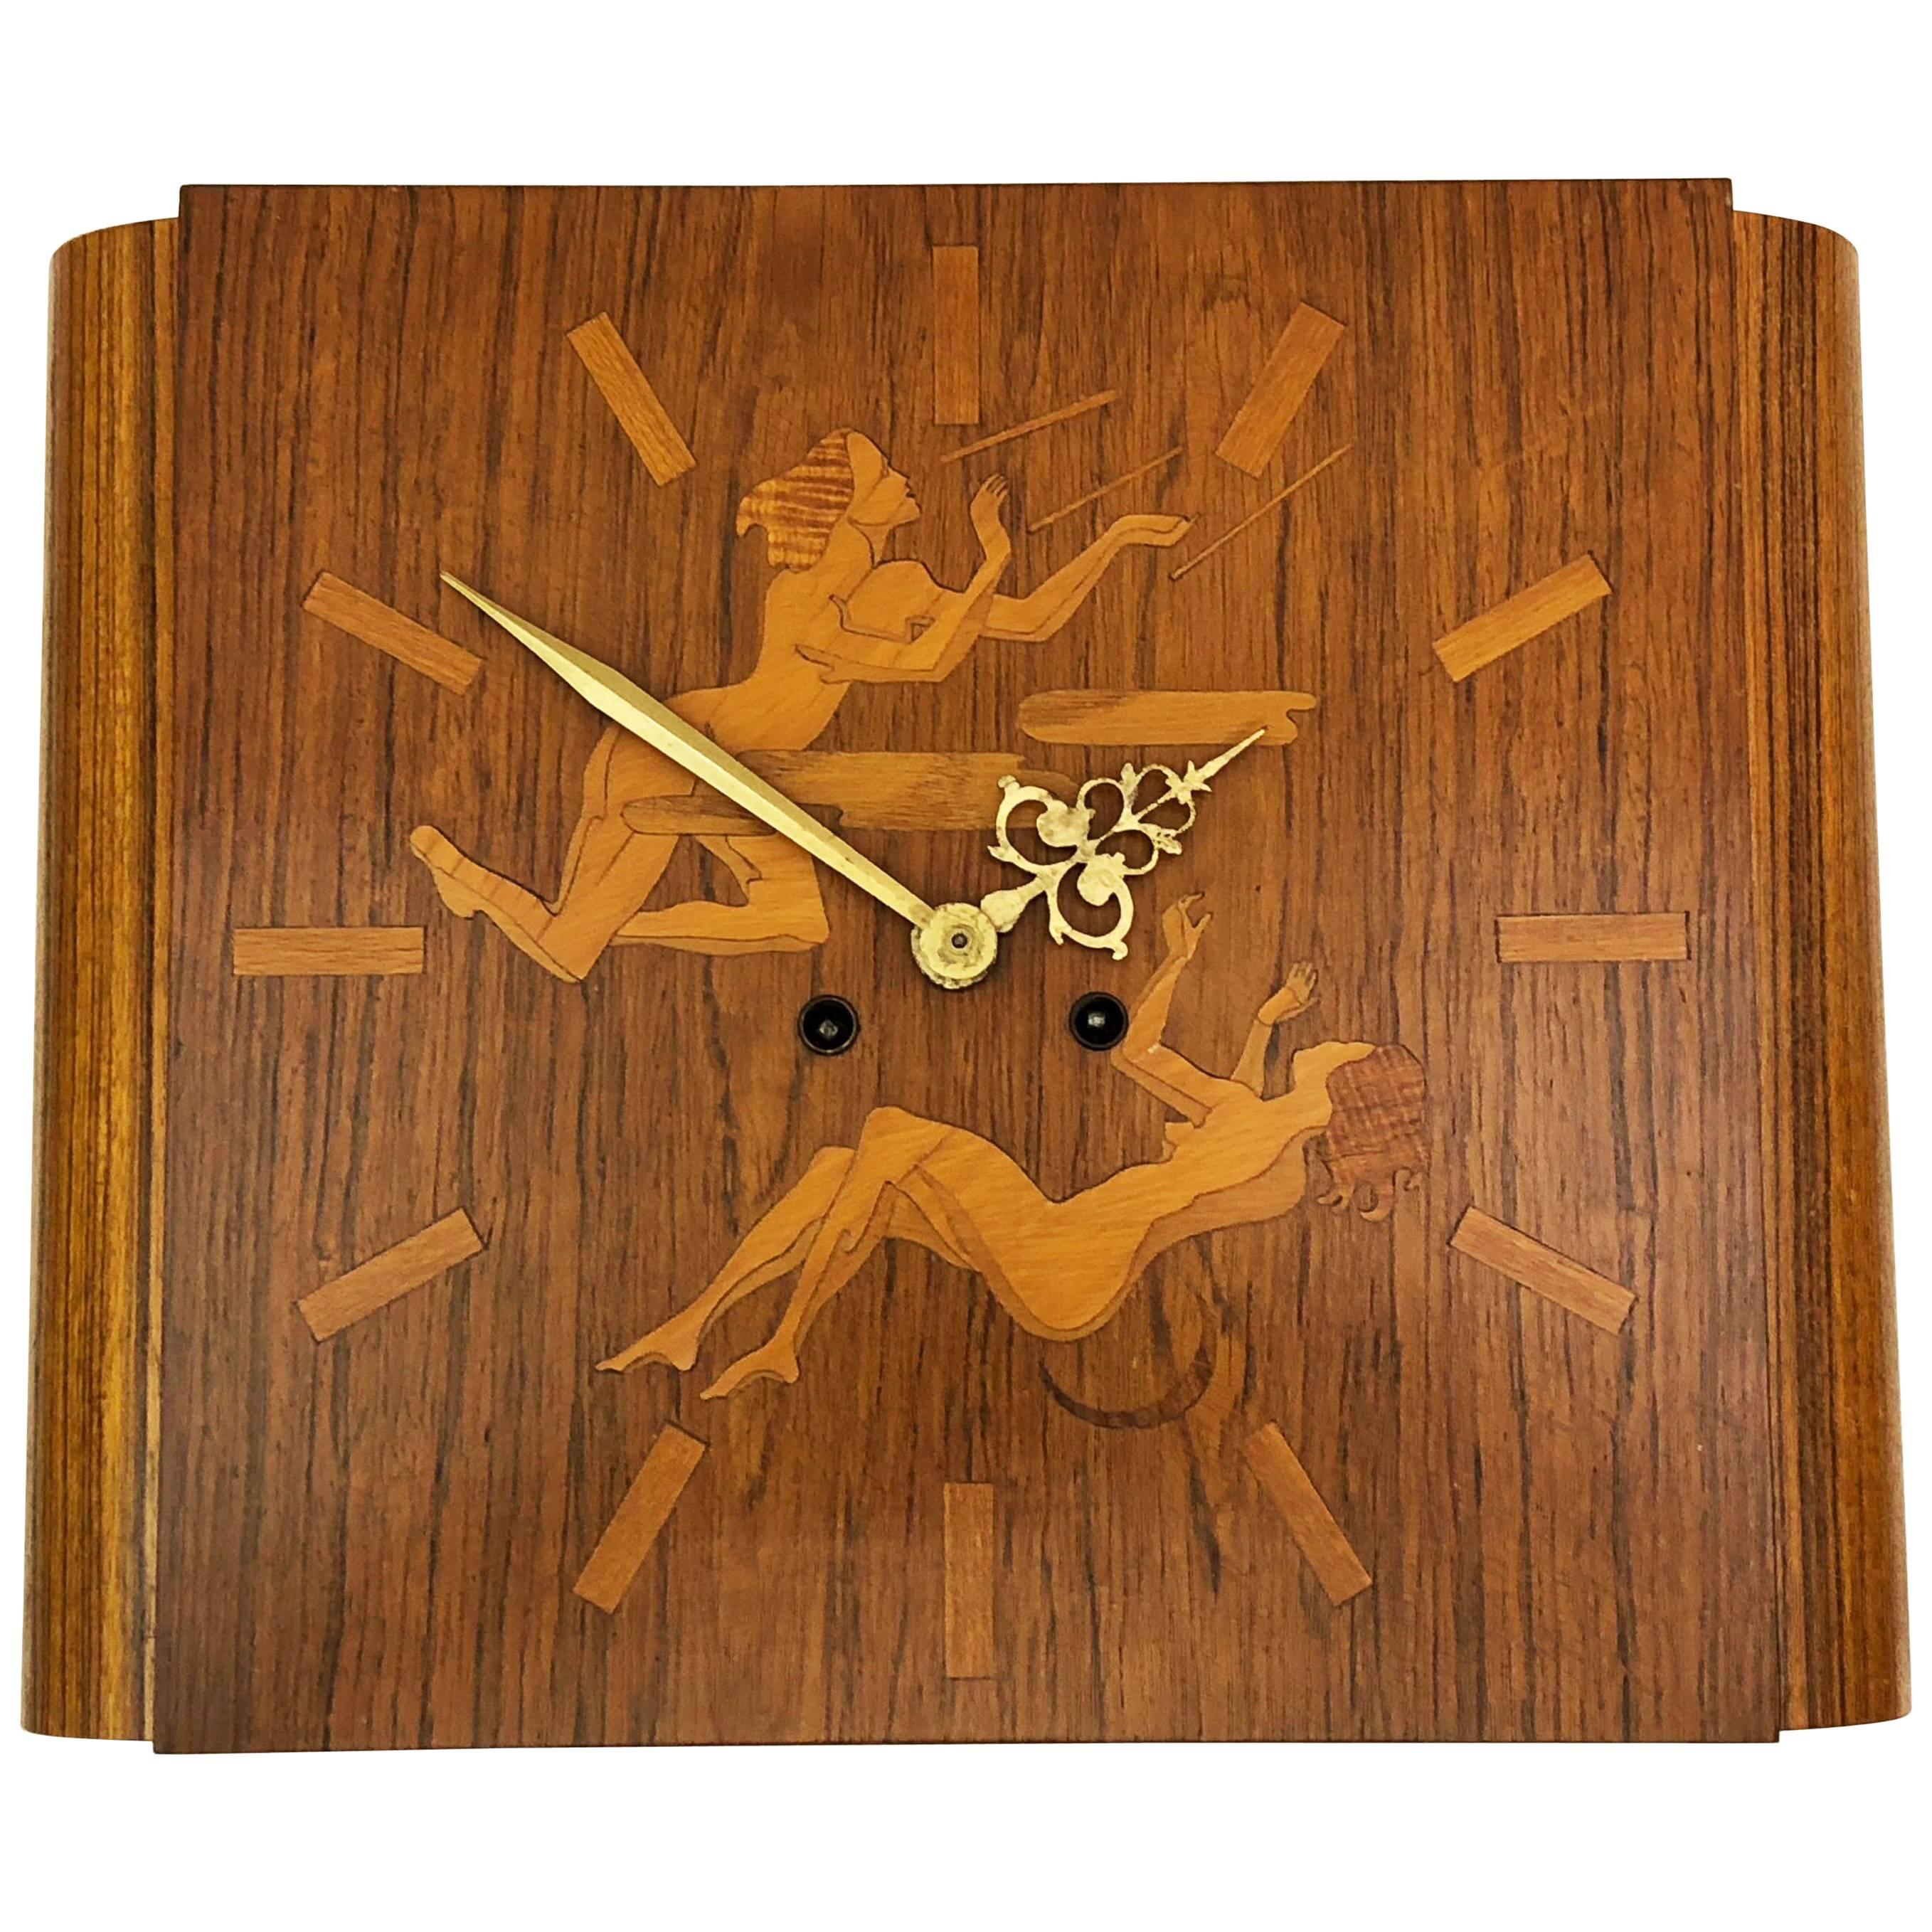 Wall Clock Attributed to Mjolby Intarsia from the Late 1930s